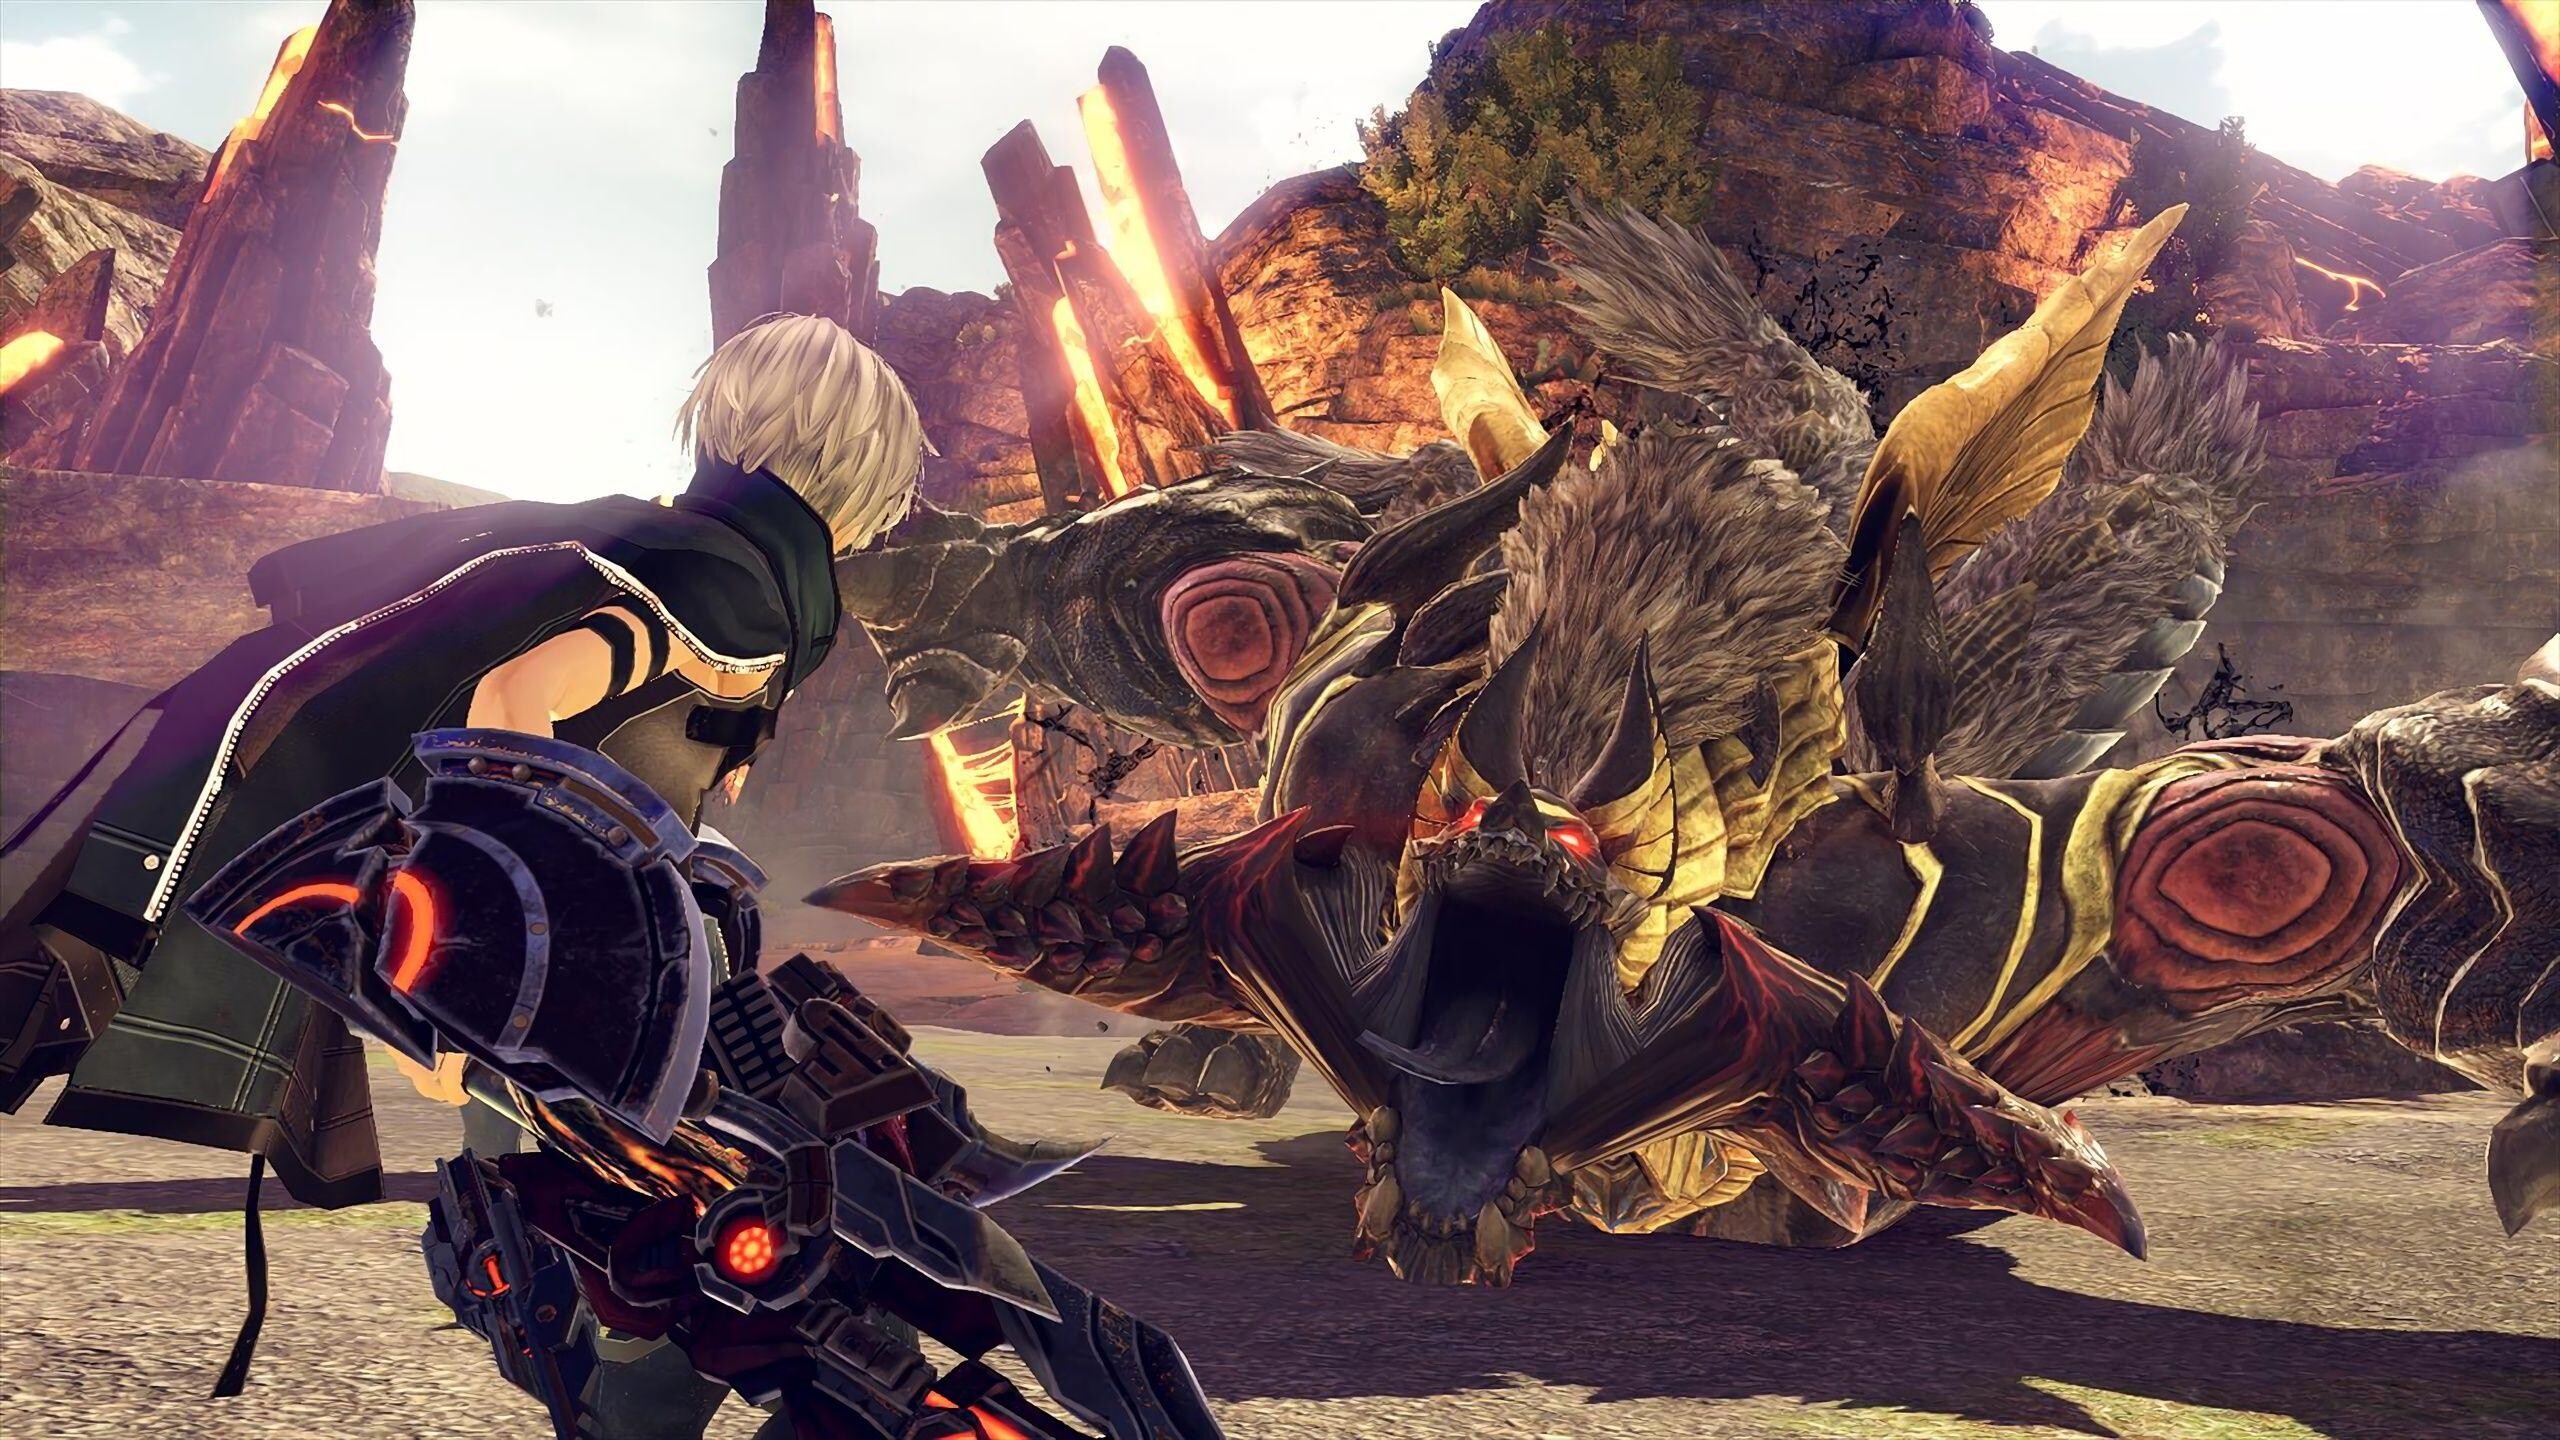 God Eater (Game): Post-apocalyptic world, A series of sci-fi action role-playing video games. 2560x1440 HD Wallpaper.